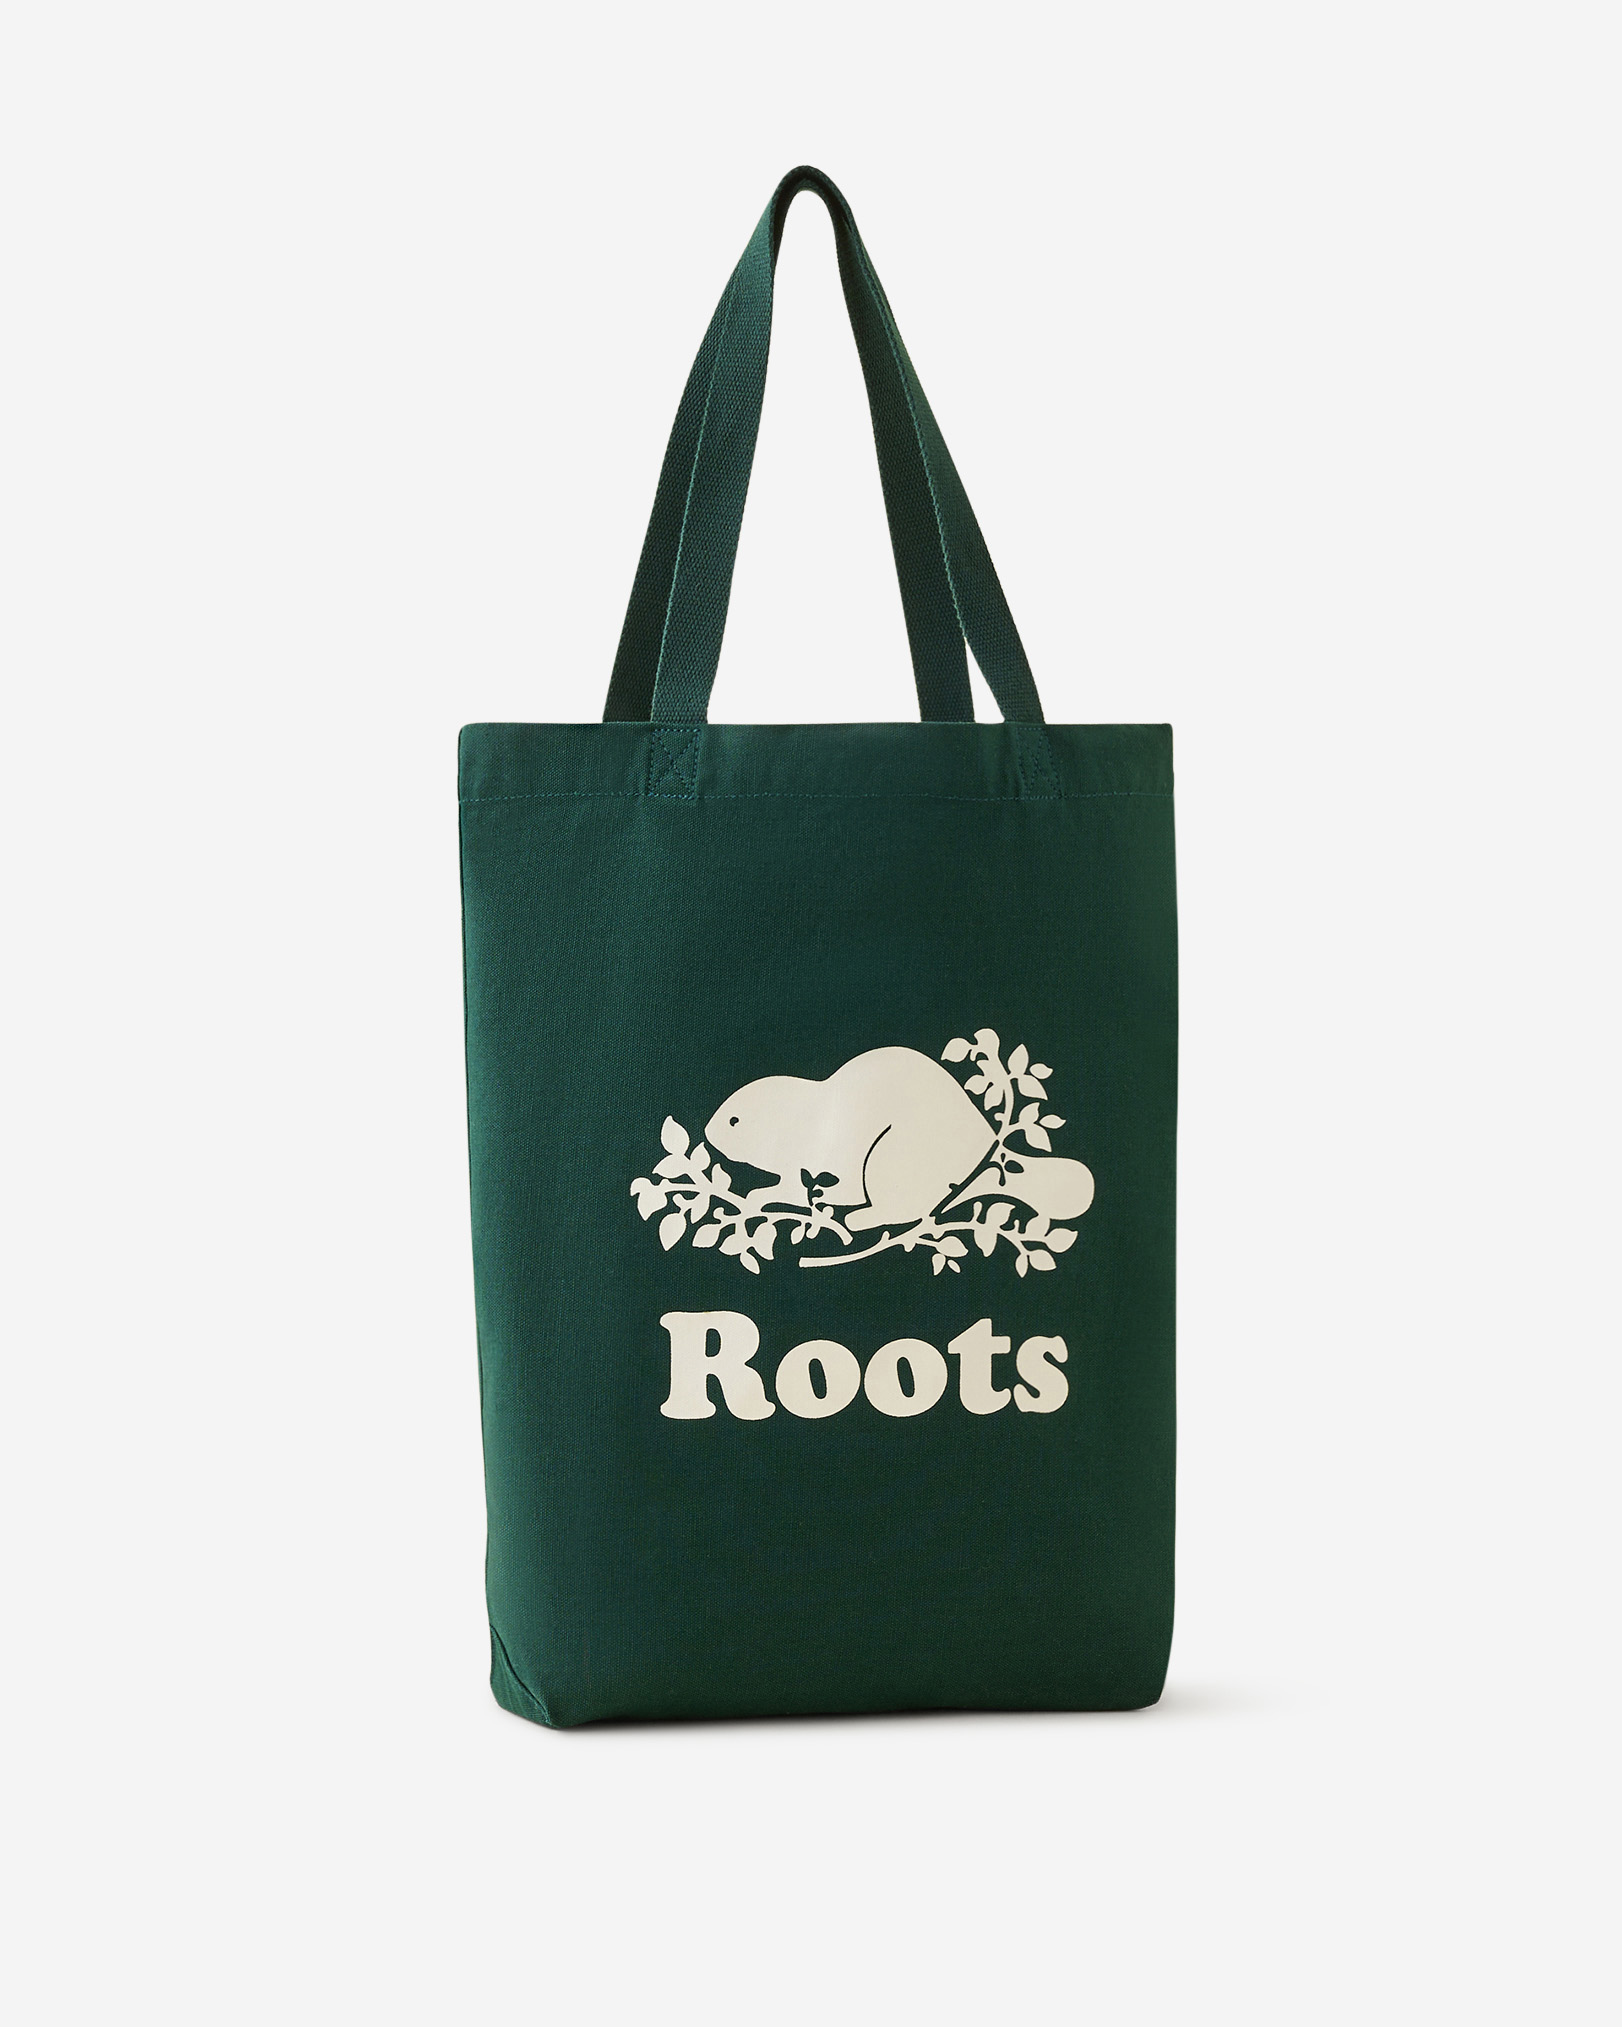 Roots Cooper Tote in Varsity Green